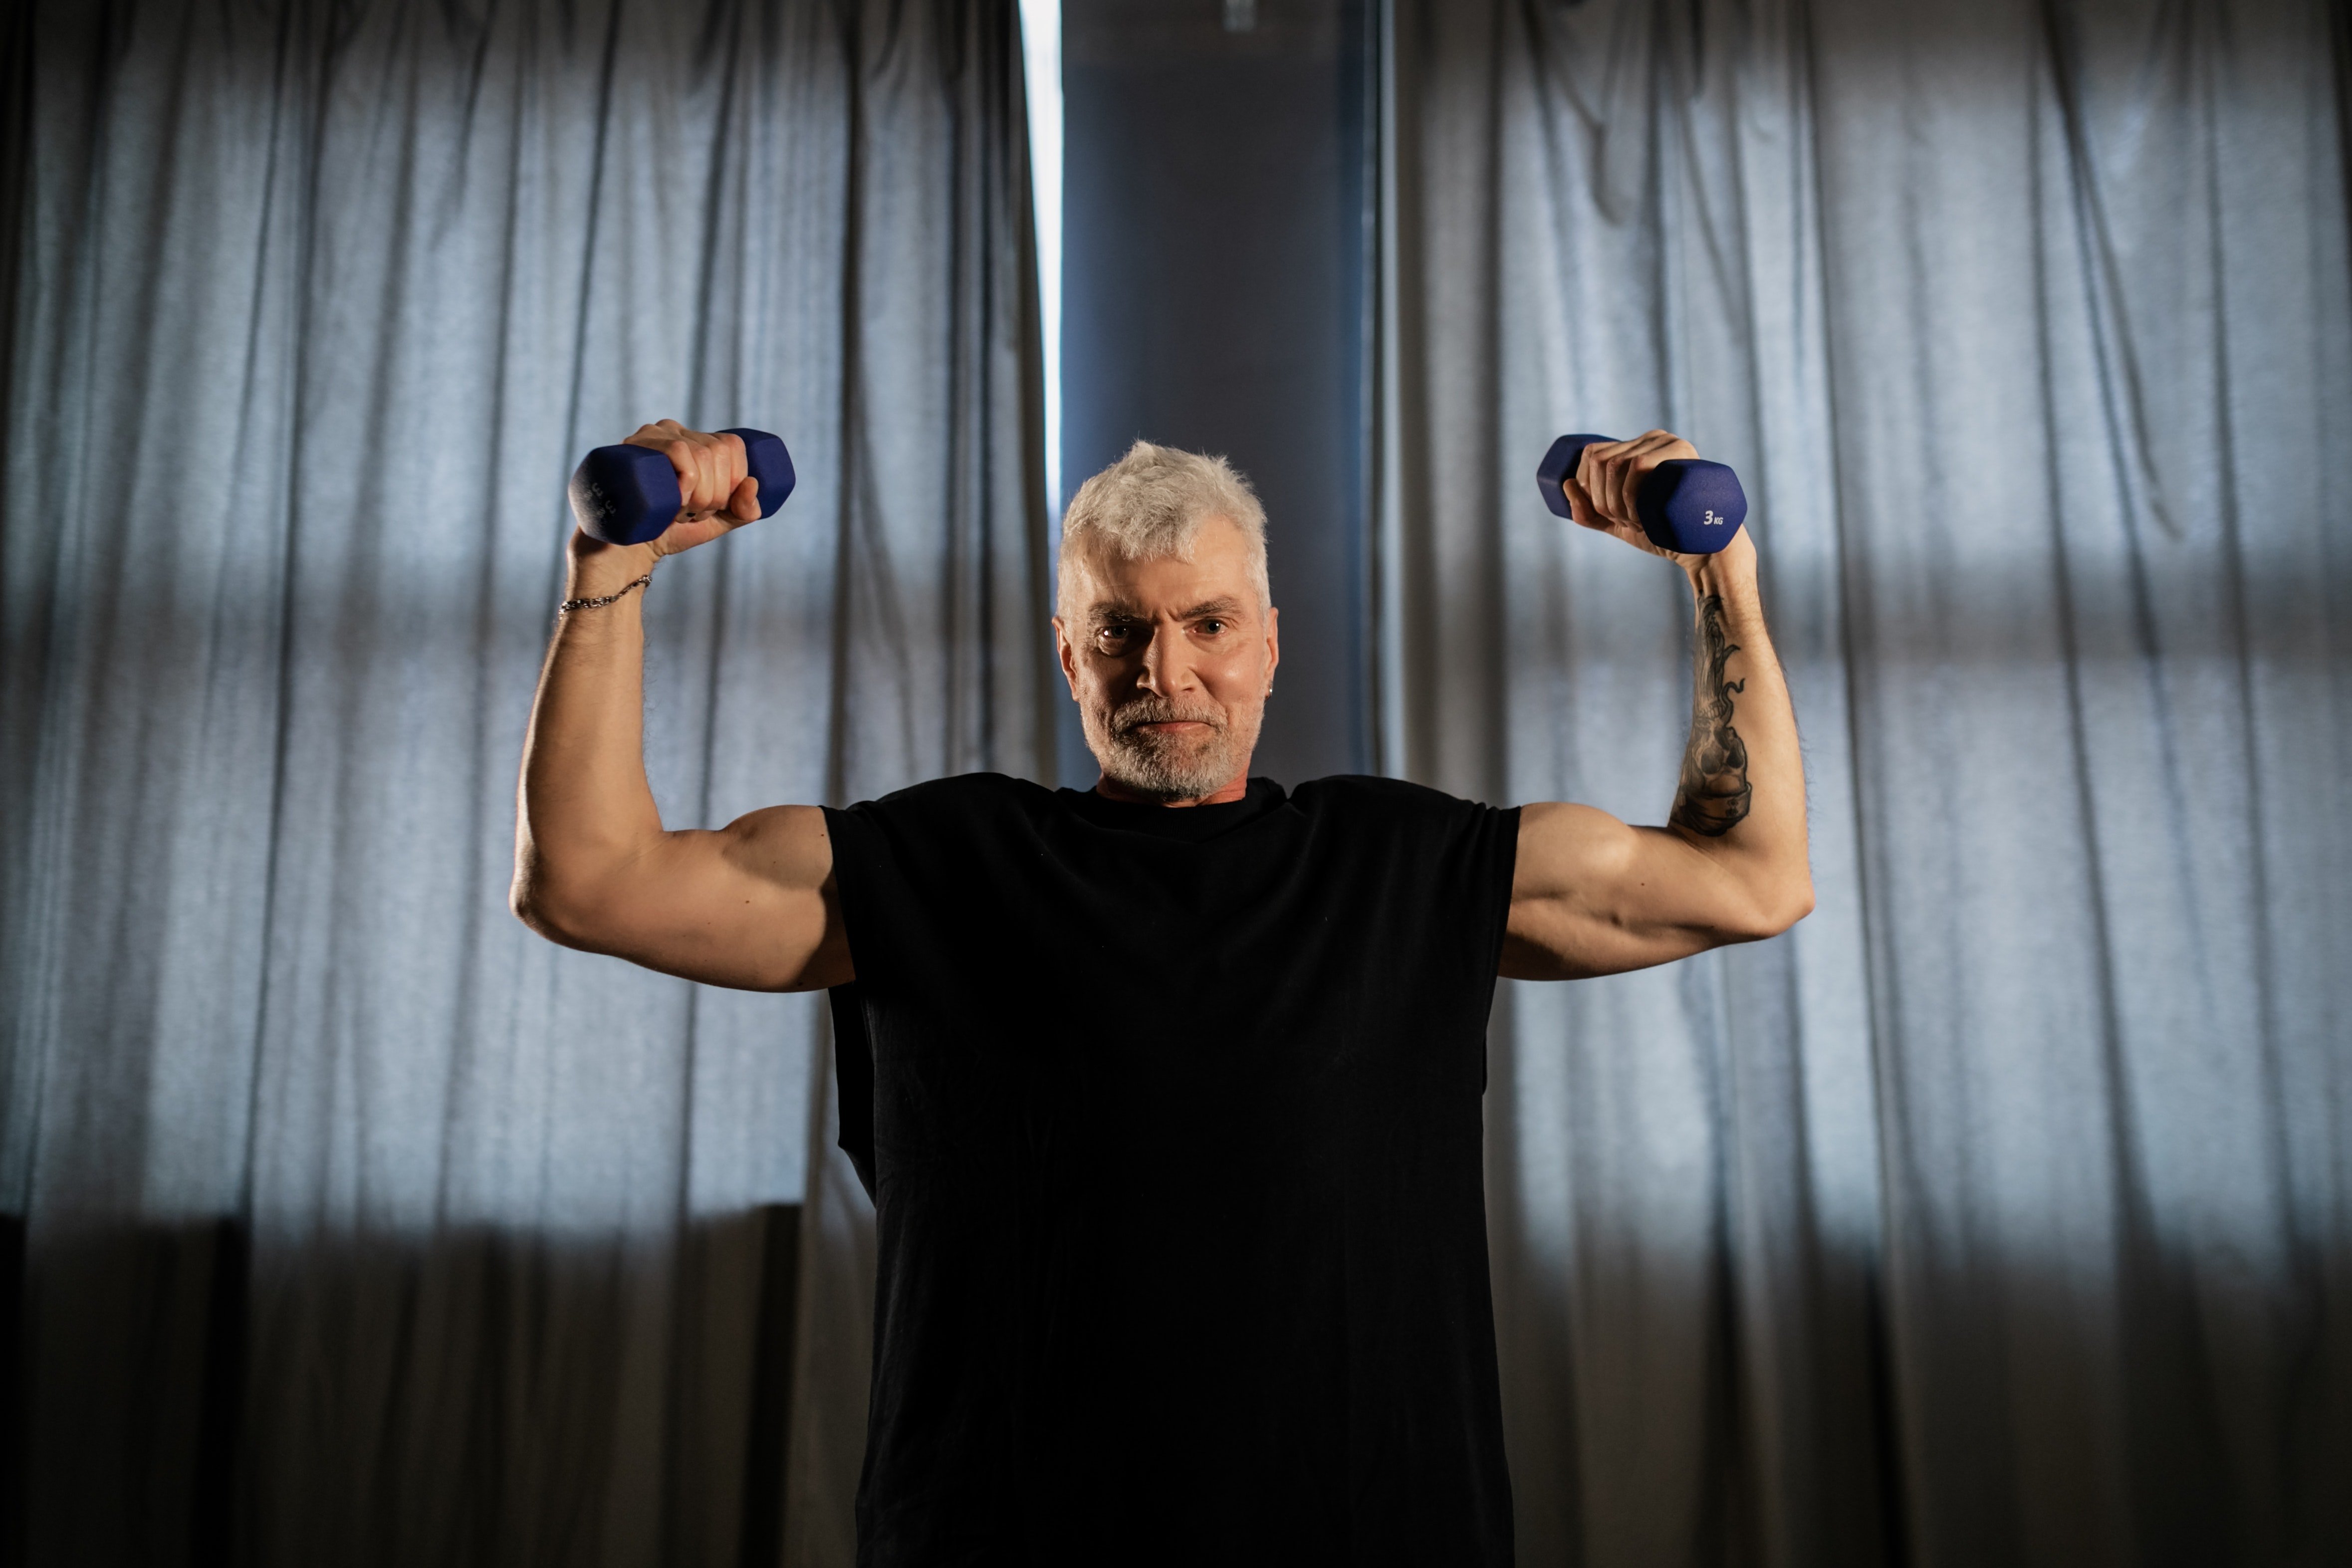 A man surprised gym-goers after he headed straight for the dumbbells. | Source: Pexels